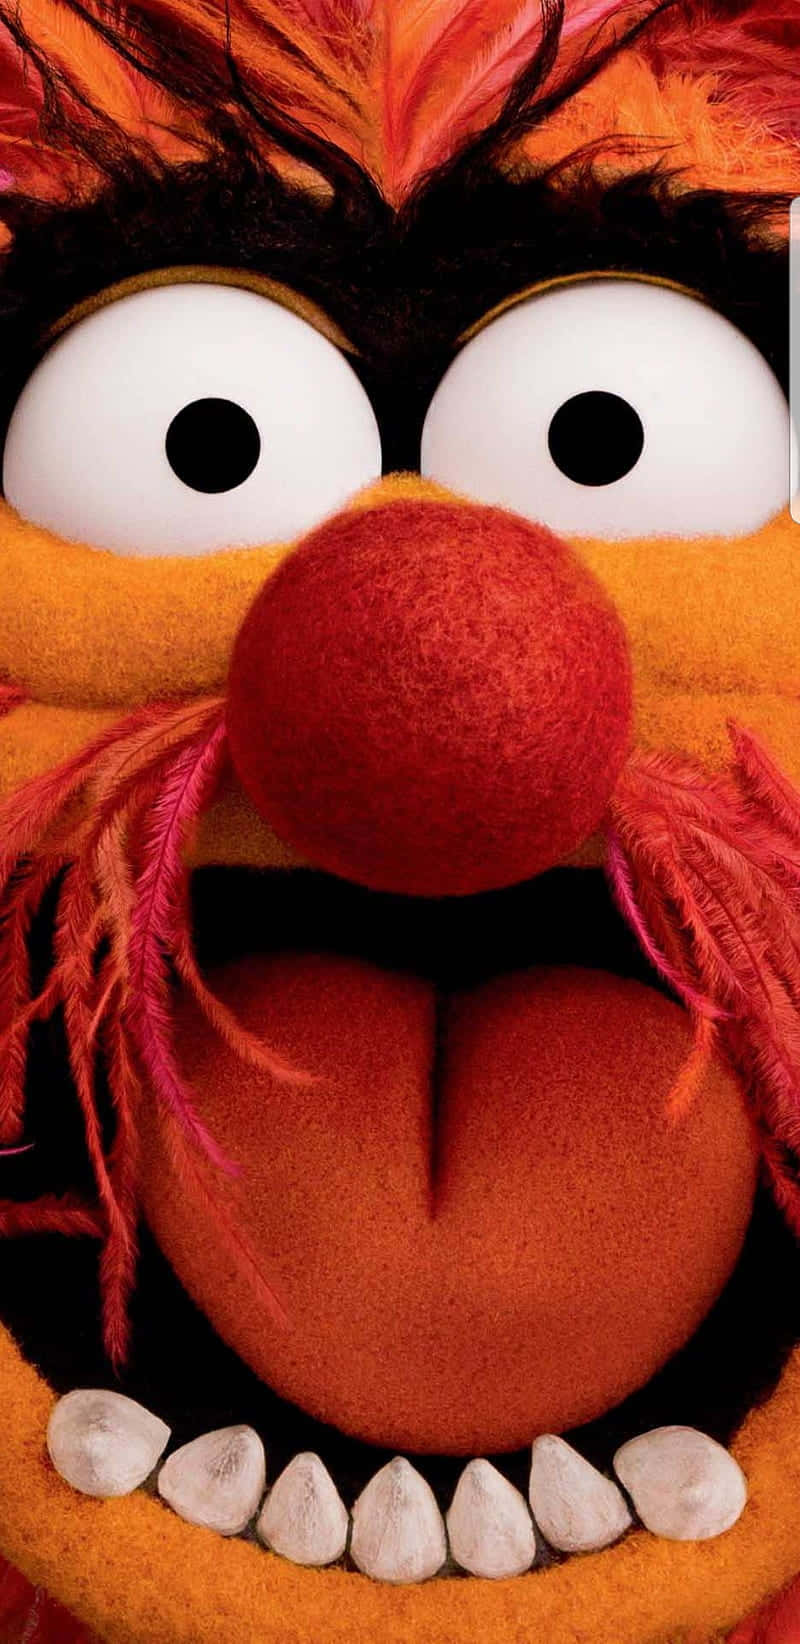 20 The Muppets HD Wallpapers and Backgrounds